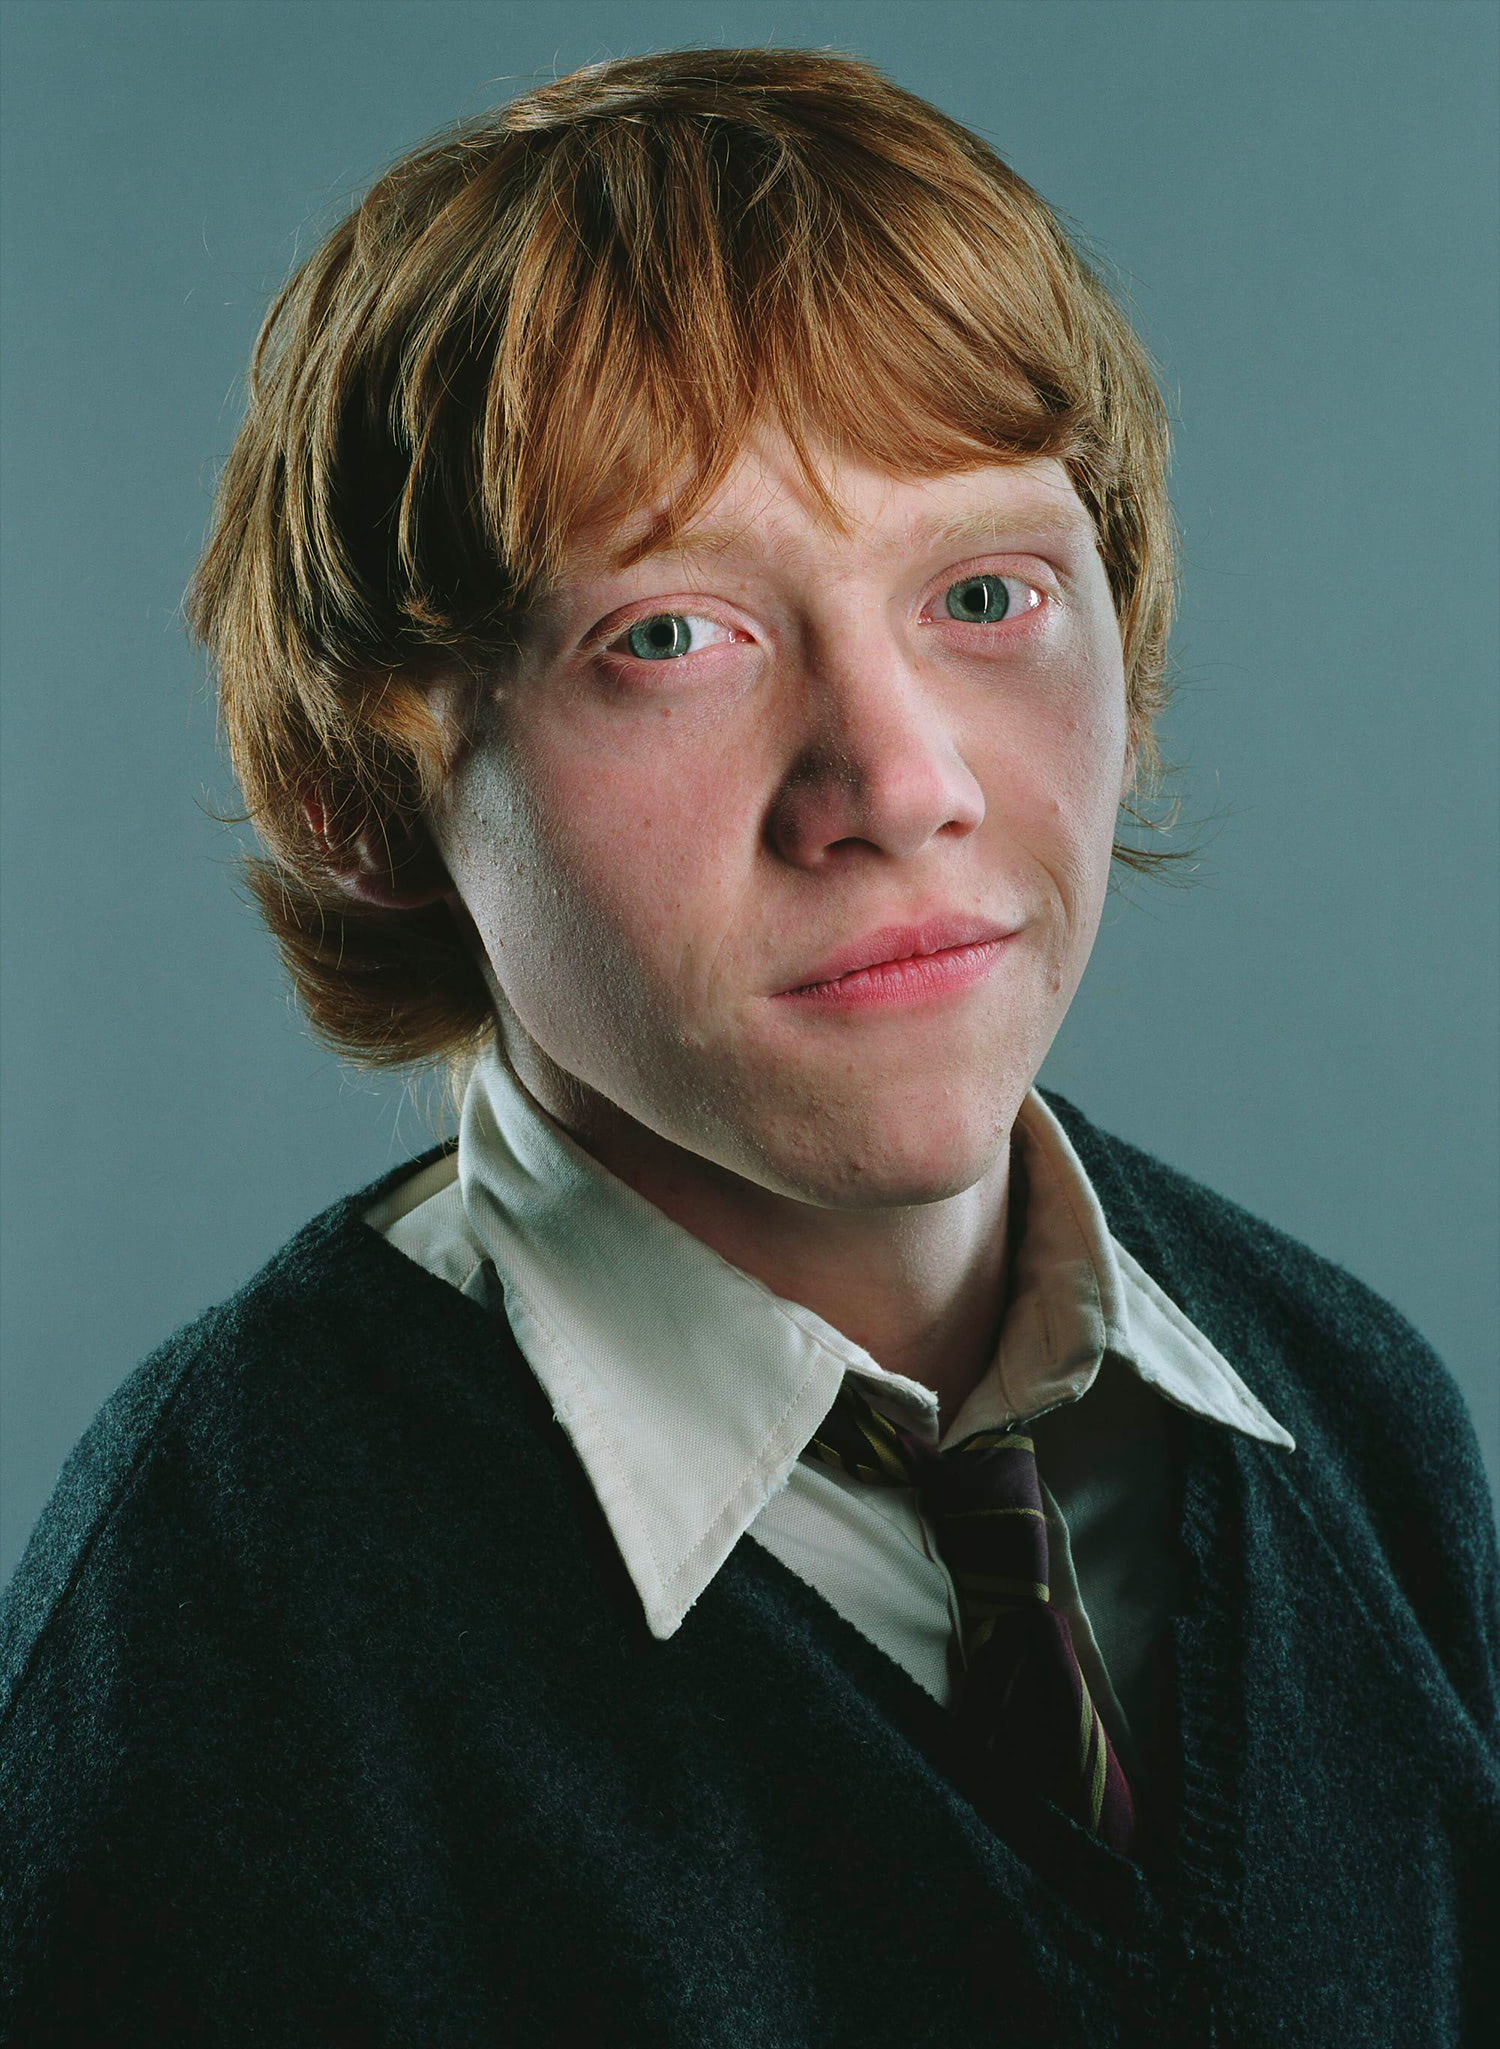 Ron Weasley' pictures.